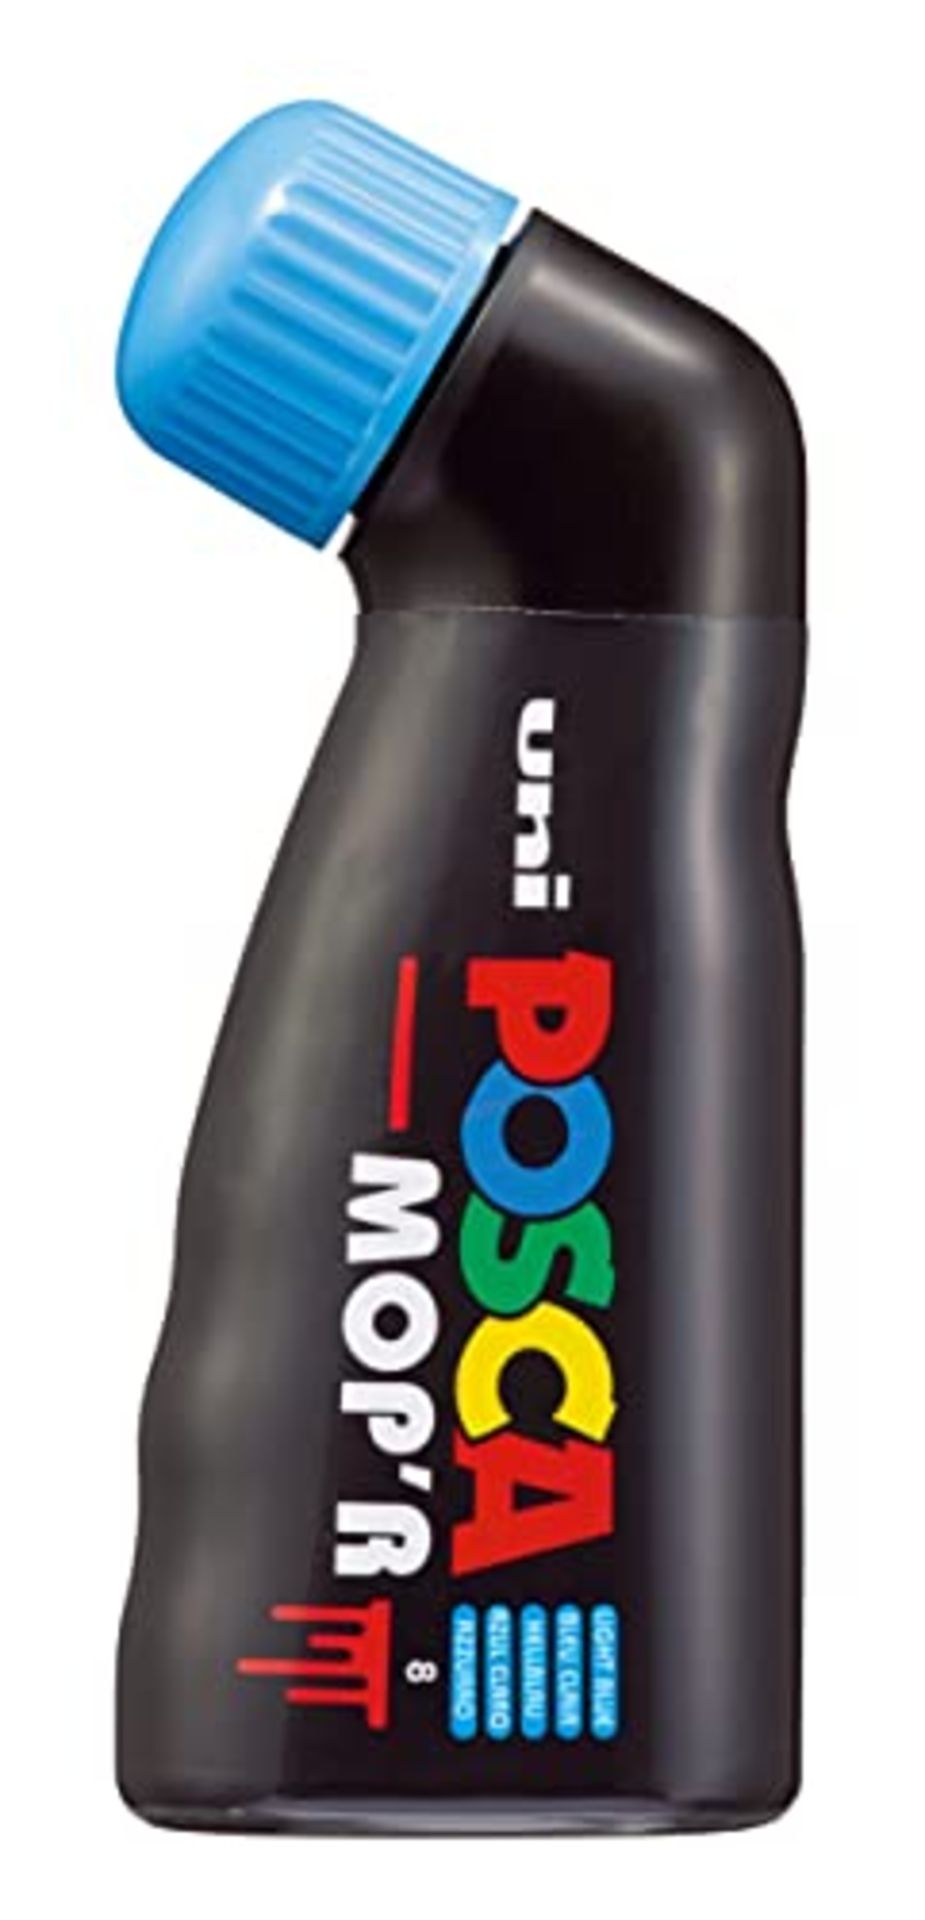 Posca MOPâ¬ "!R PCM-22 Water Based Permanent Paint Markers. 3mm - 19mm Round Tip fo